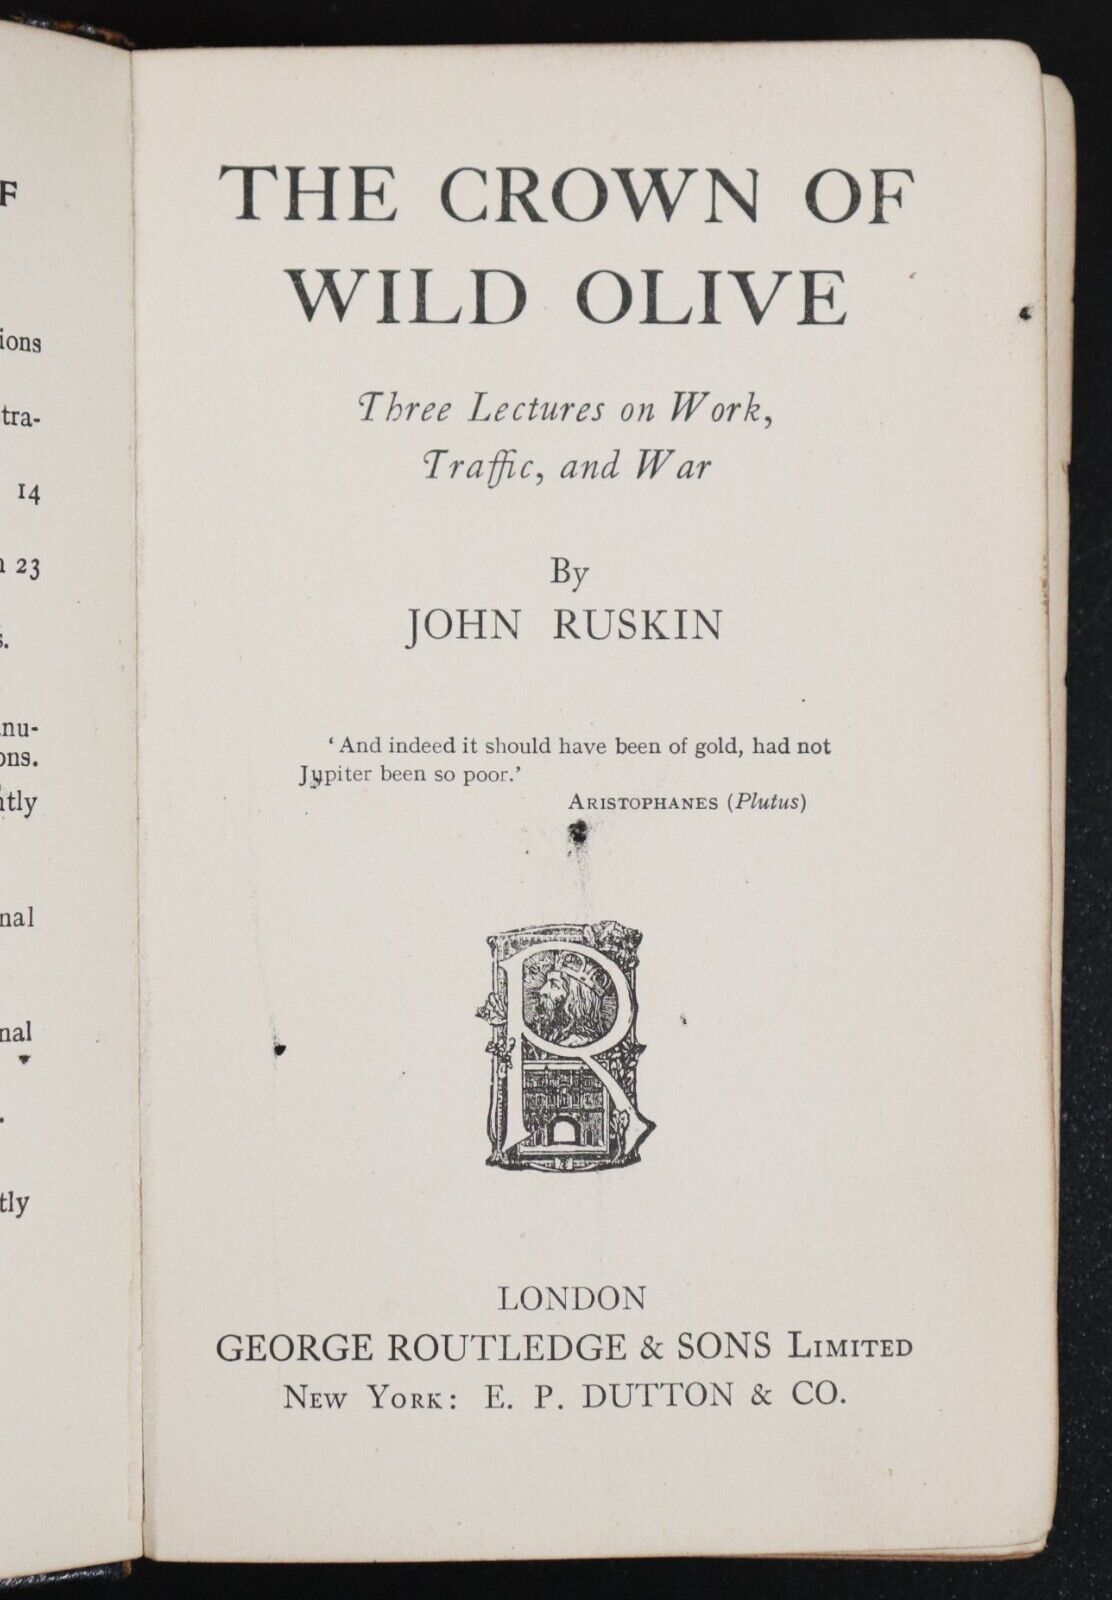 c1910 The Crown Of Wild Olive by John Ruskin Antique Book Of Three Lectures - 0